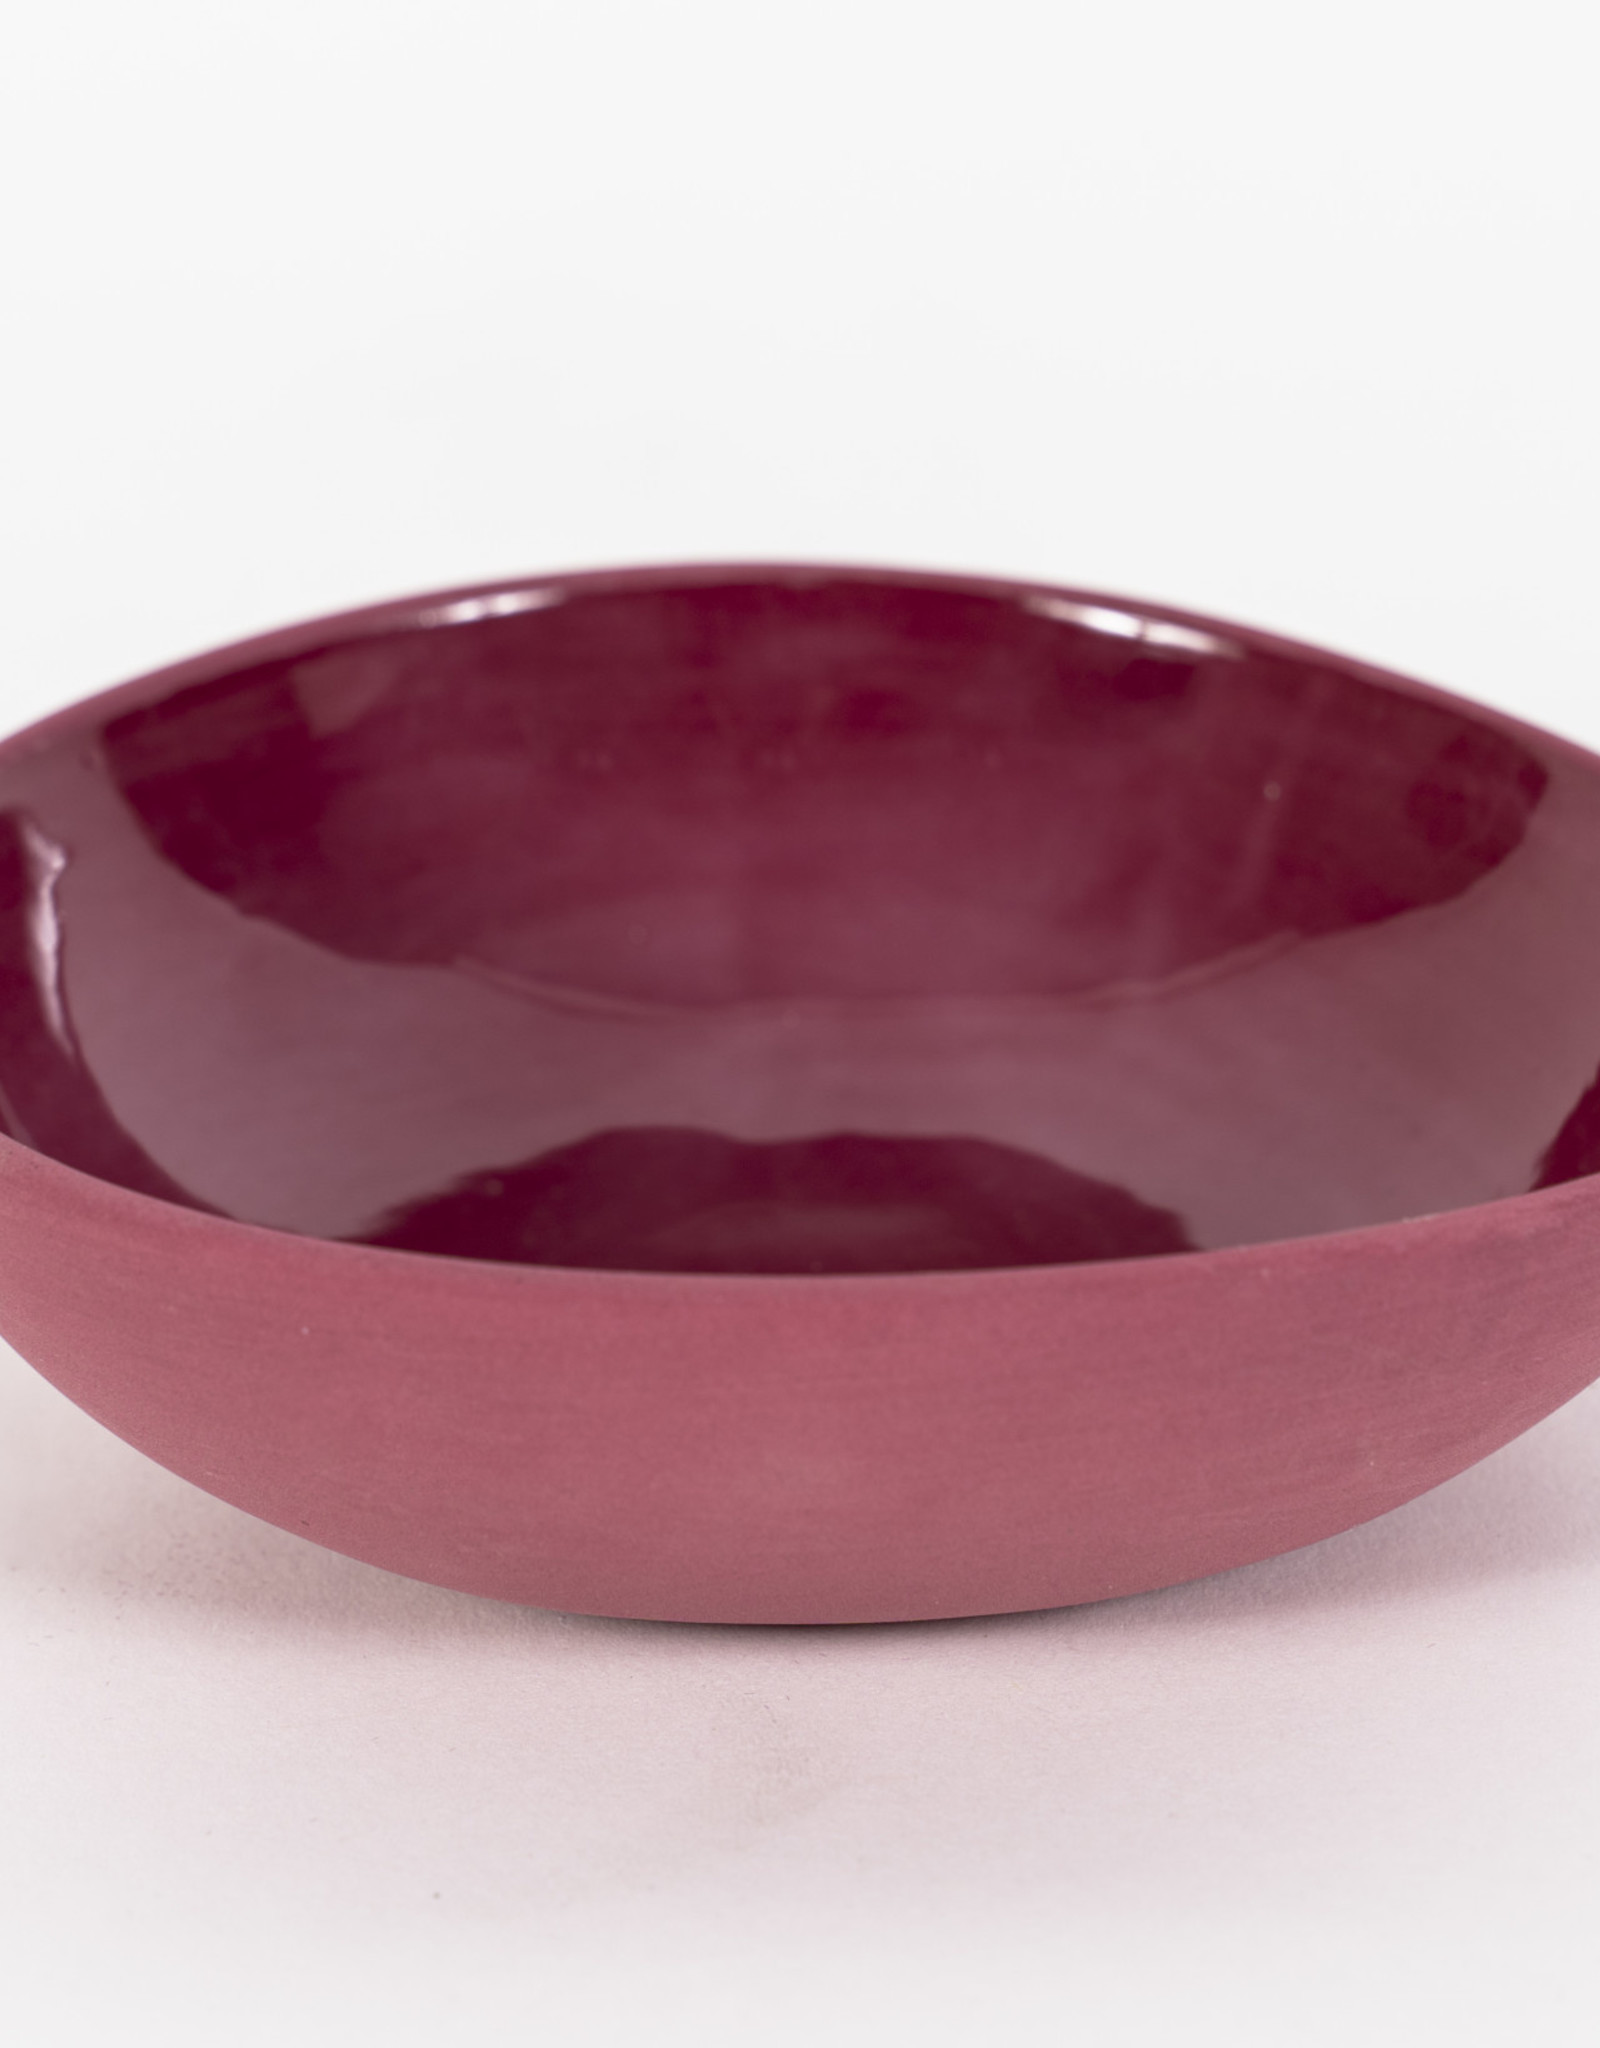 Louise Deroualle Magenta Small Wide Bowl